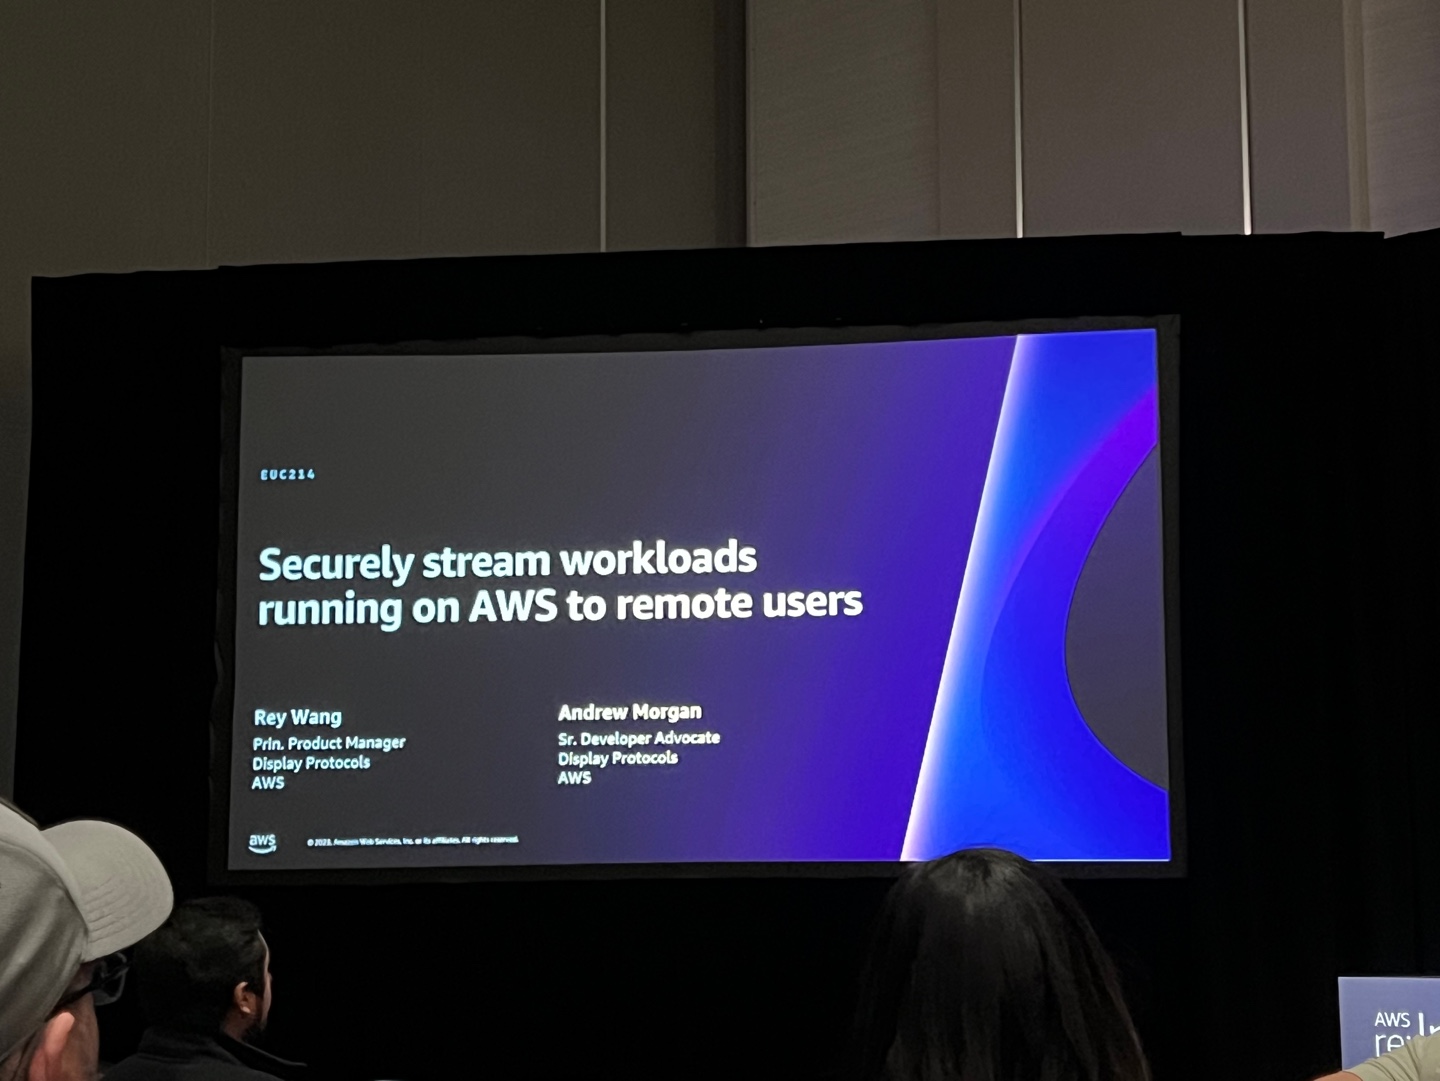 Securely stream workloads running on AWS to remote users